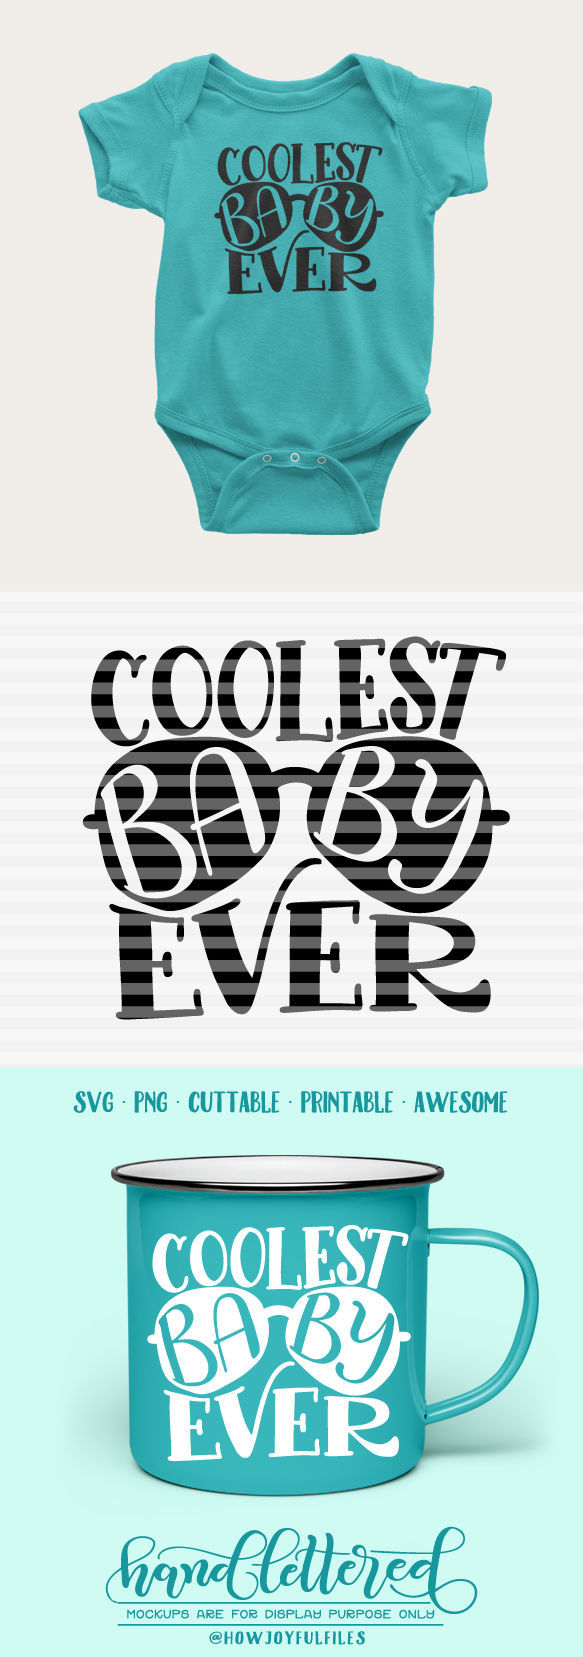 Download Coolest baby ever - New baby - SVG - PDF - DXF - hand drawn lettered cut file - graphic overlay ...